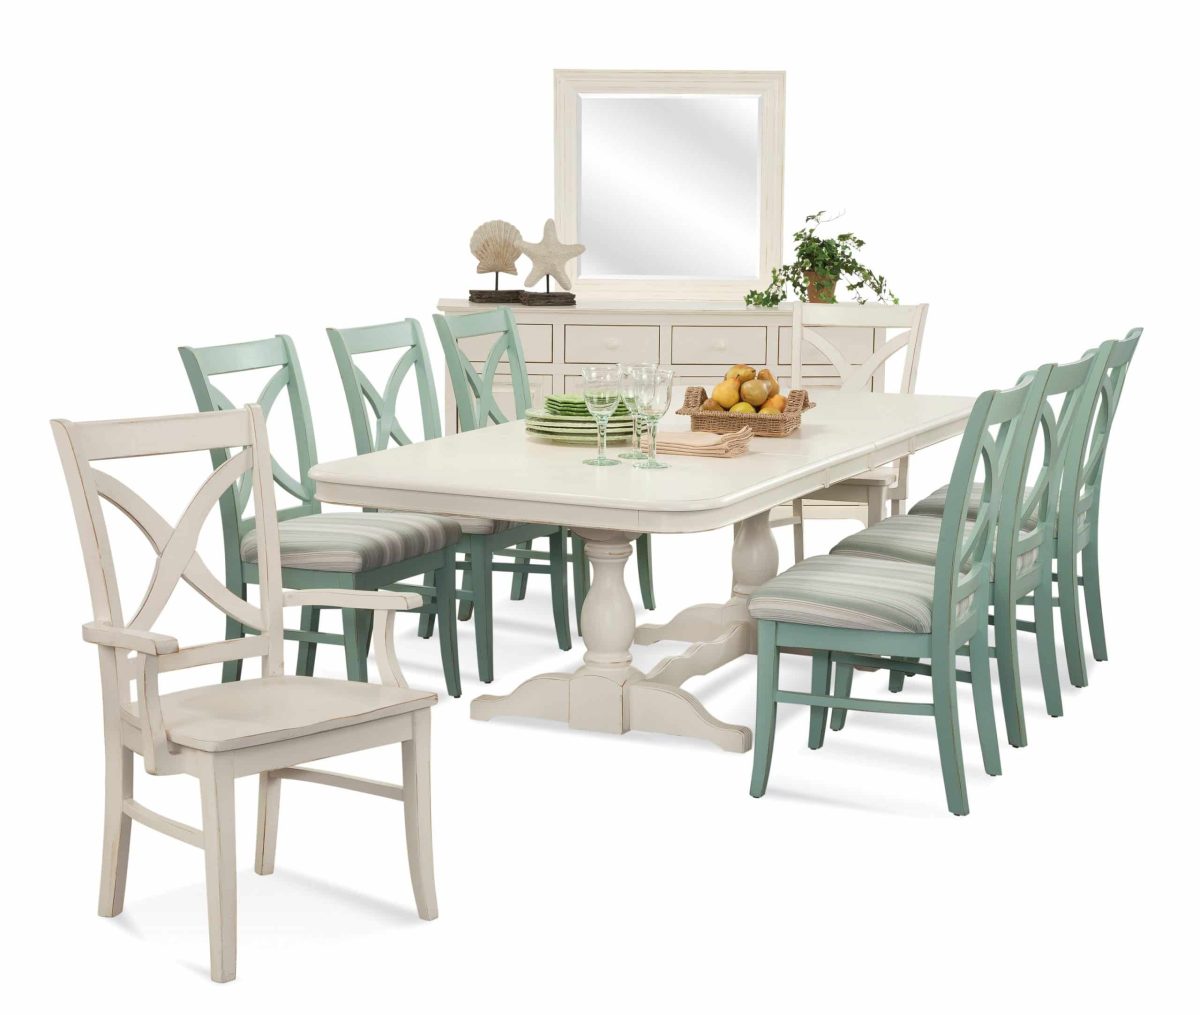 Hues Indoor 9 Pc Dining Set by Braxton Culler Model 1064-DINSET